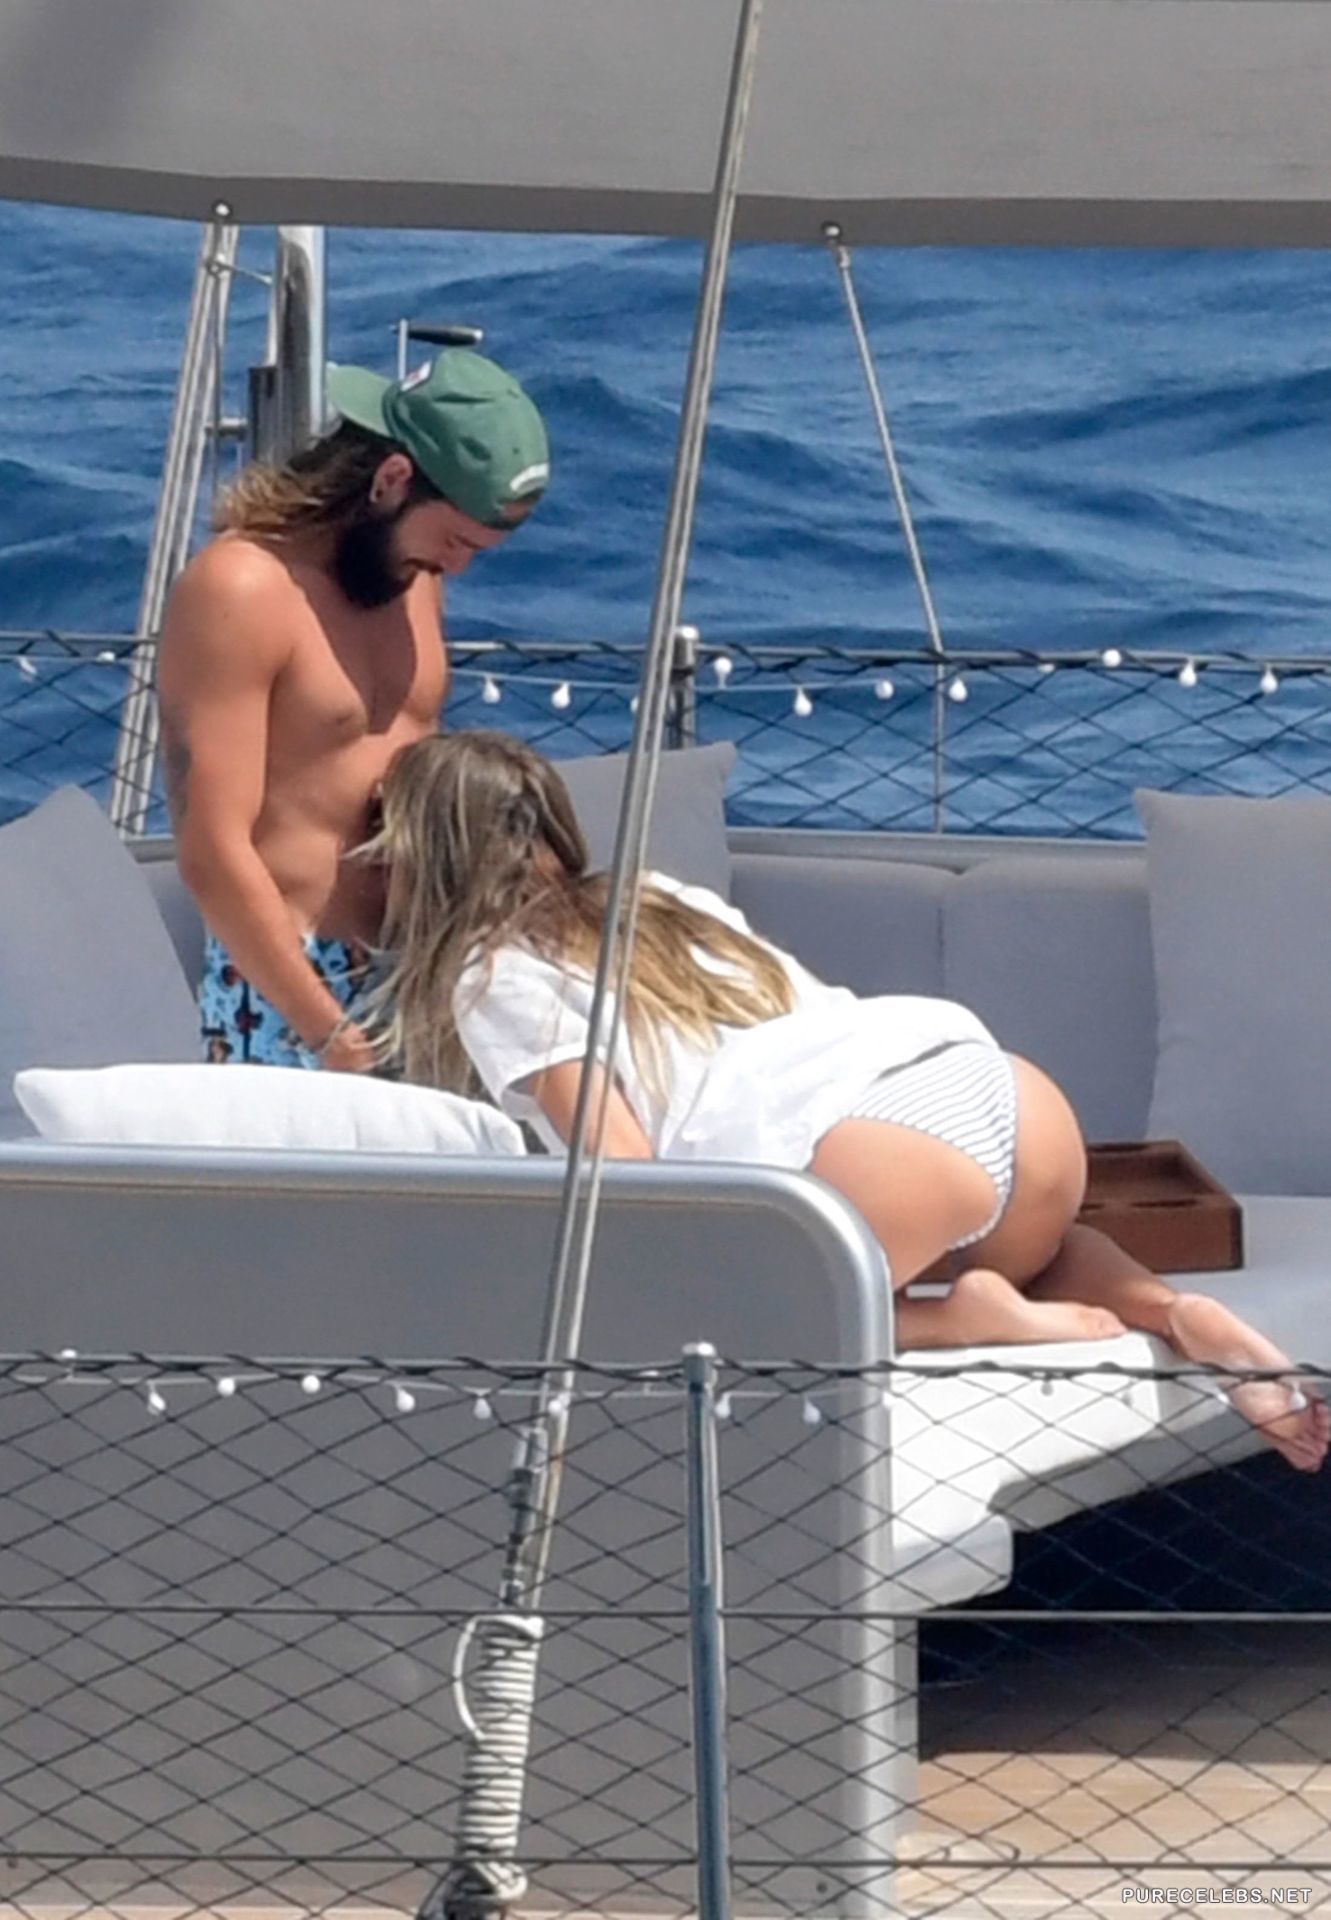 Heidi Klum Topless And Naughty Kiss On A Yacht pic pic